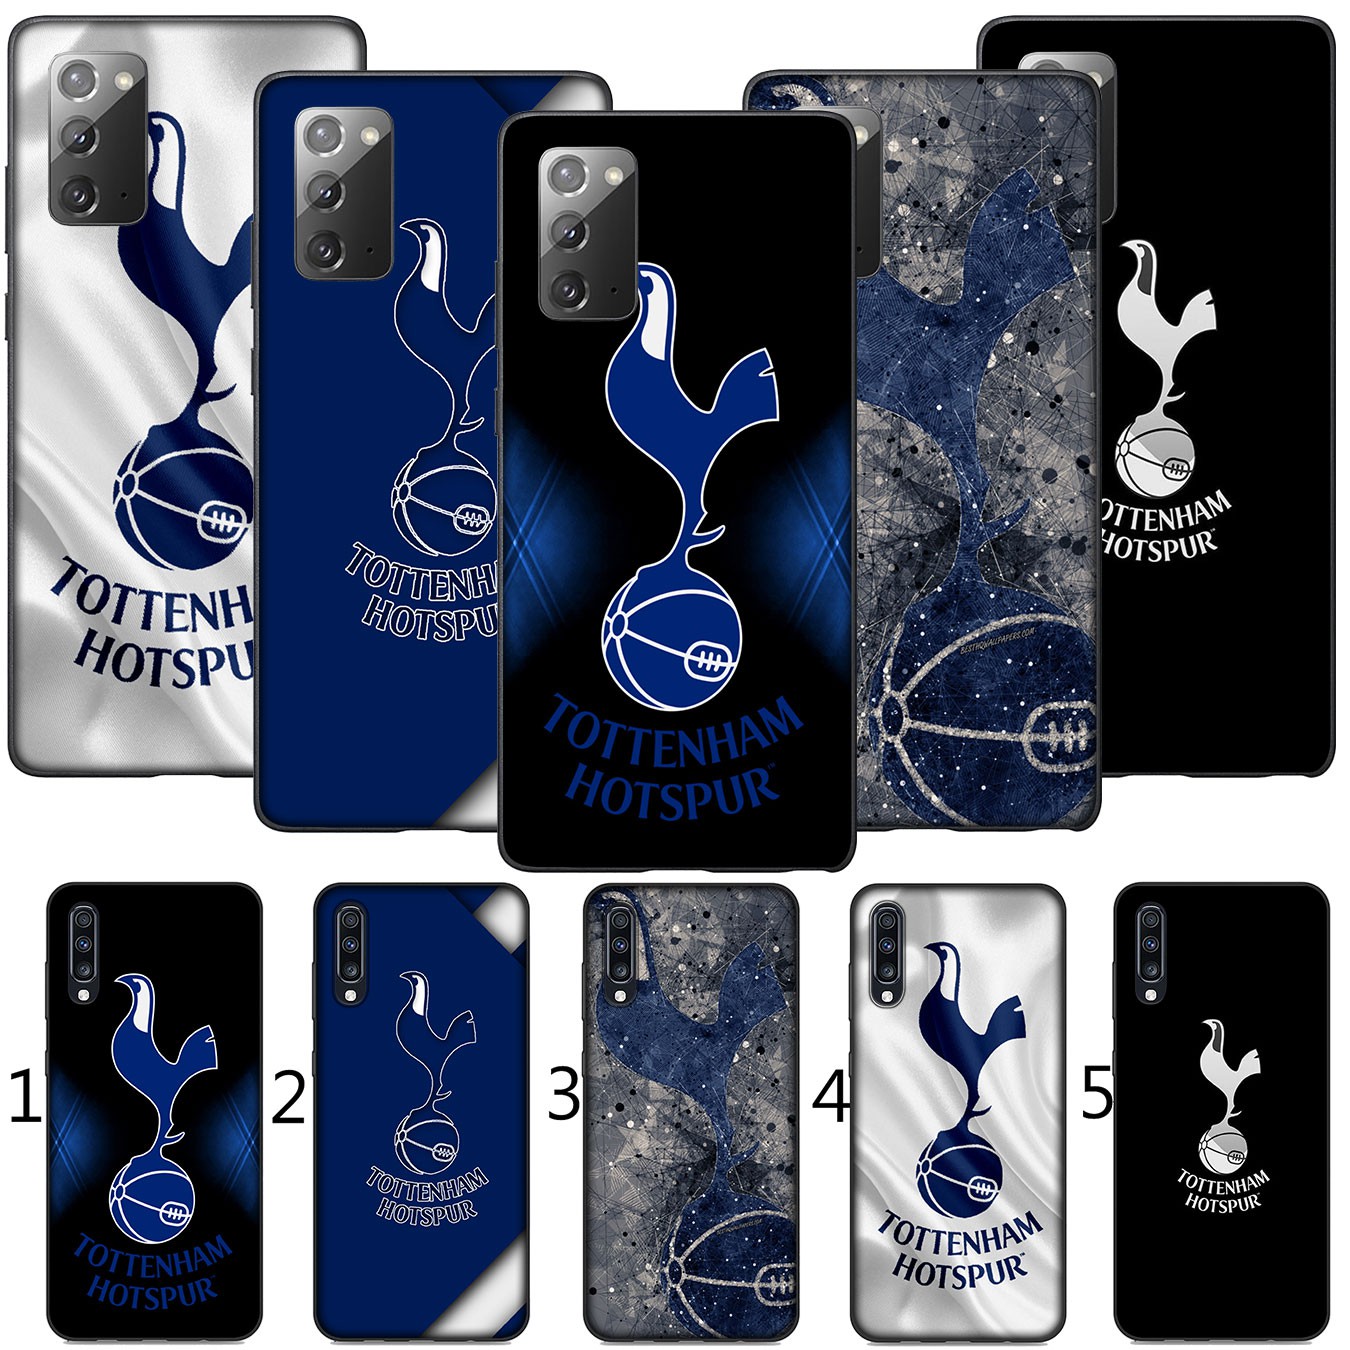 Samsung Galaxy S9 S10 S20 FE Ultra Plus Lite S20+ S9+ S10+ S20Plus Casing Soft Silicone Phone Case Tottenham Hotspur Football Cover